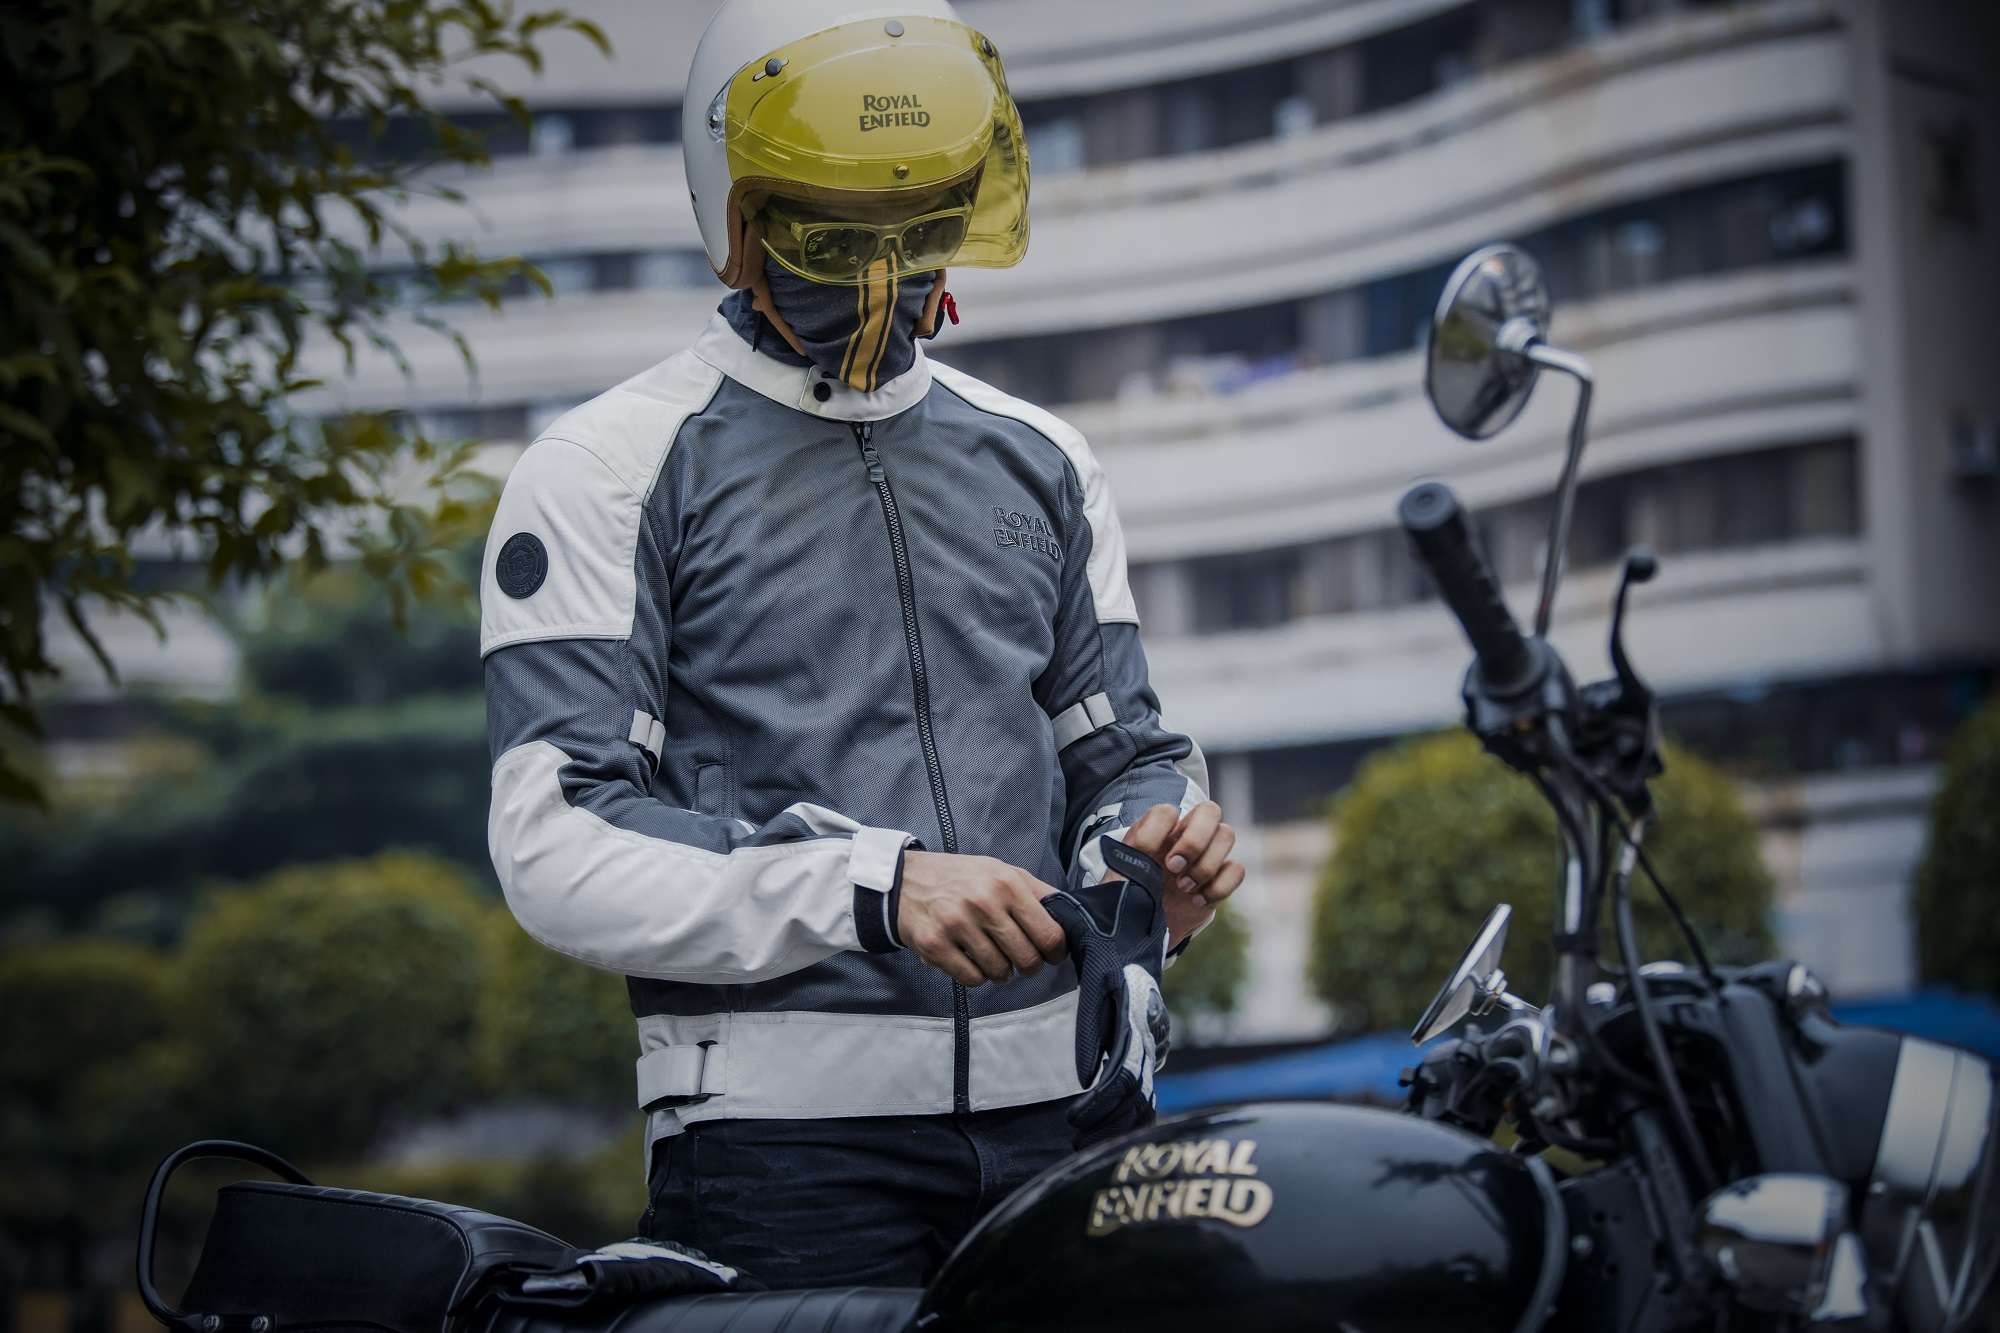 riding jacket for royal enfield